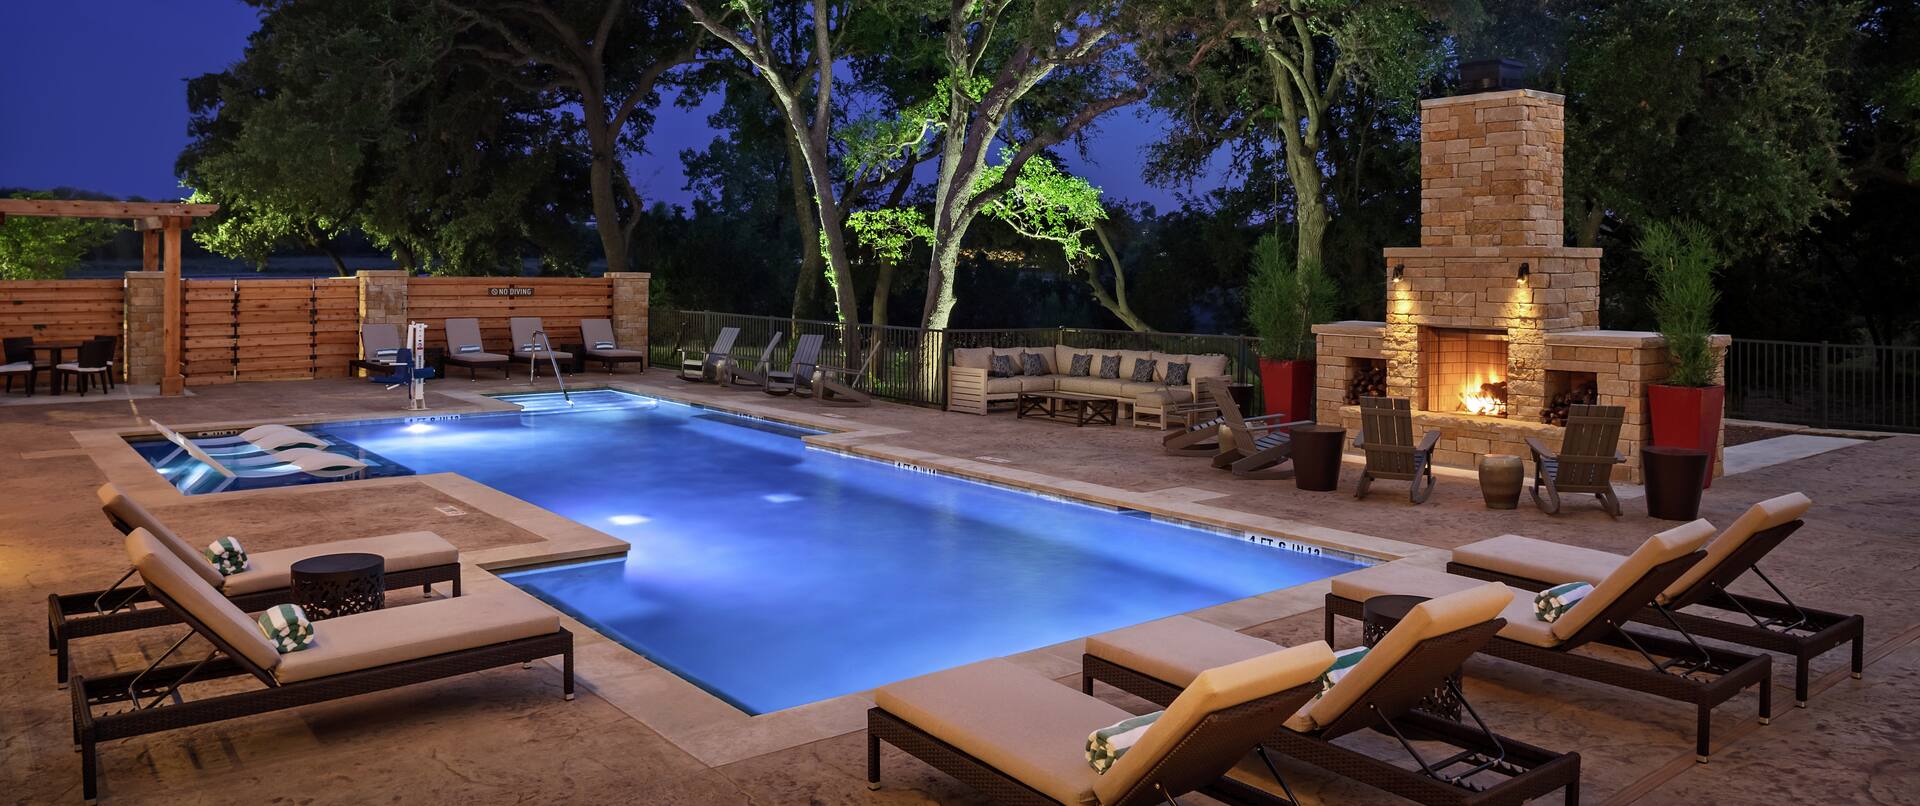 The Bevy Hotel offers a resort style pool appointed with luxury finishes and seating